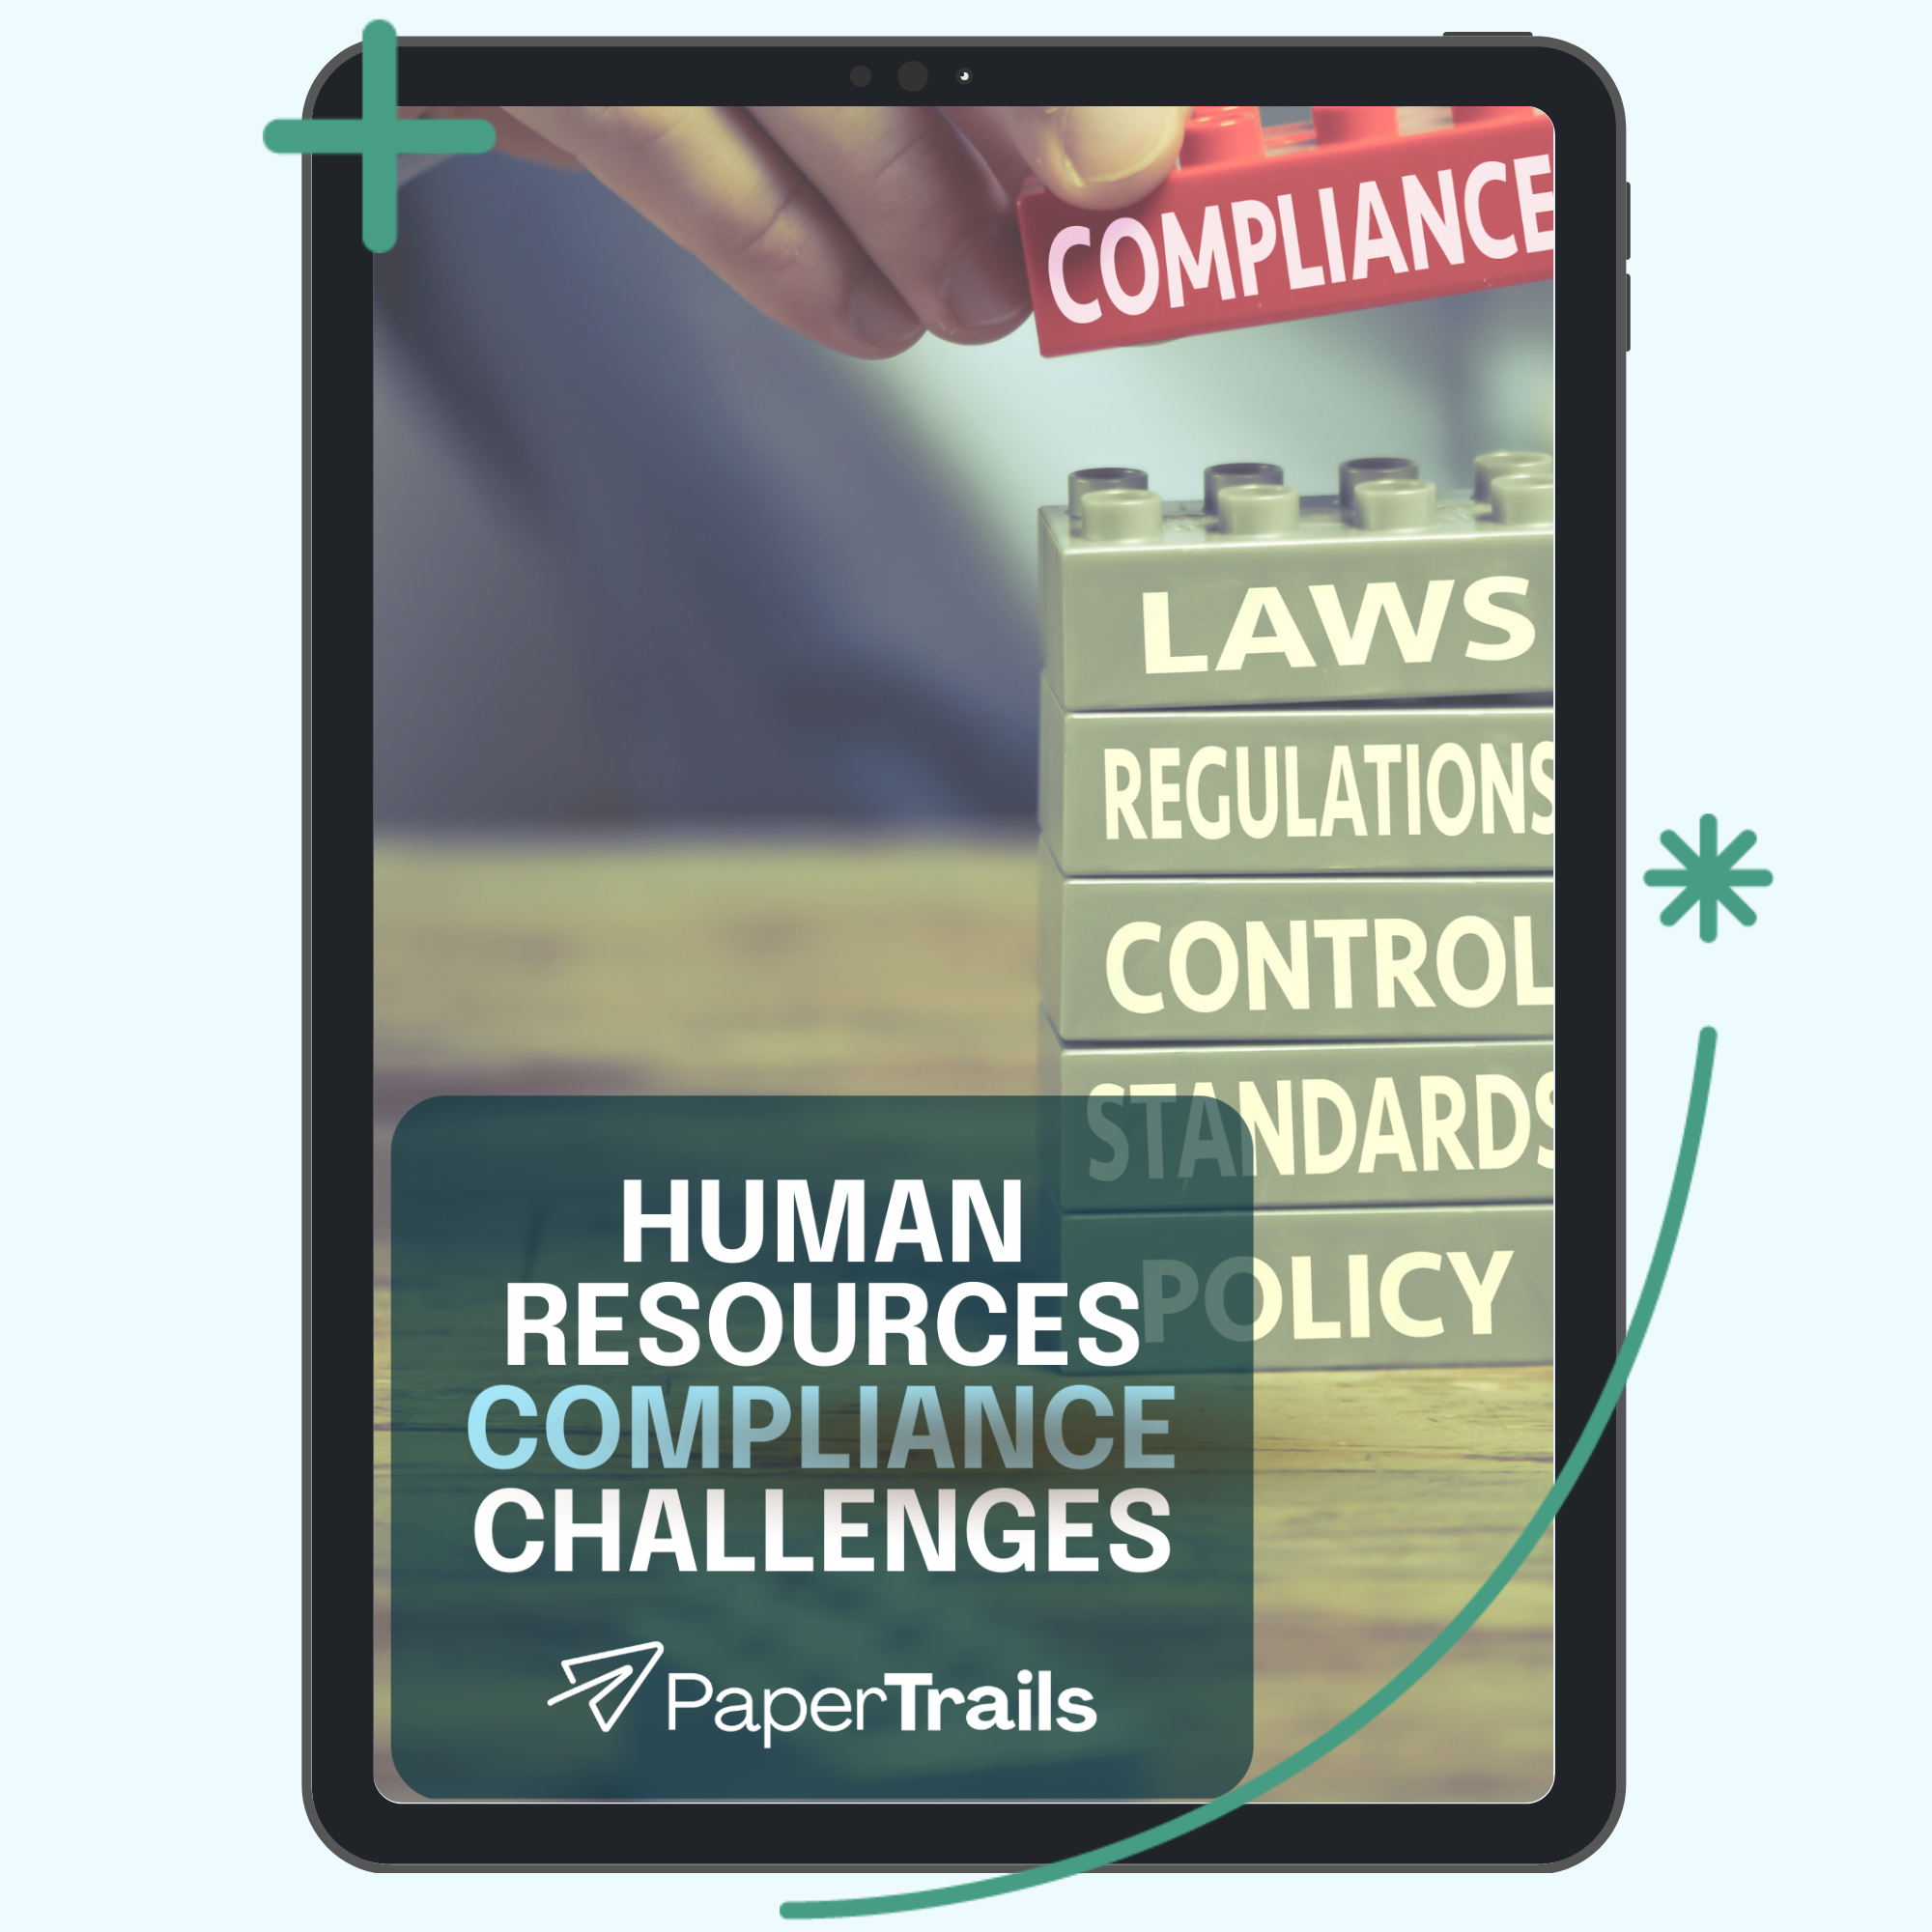 HR Compliance Challenges Guide